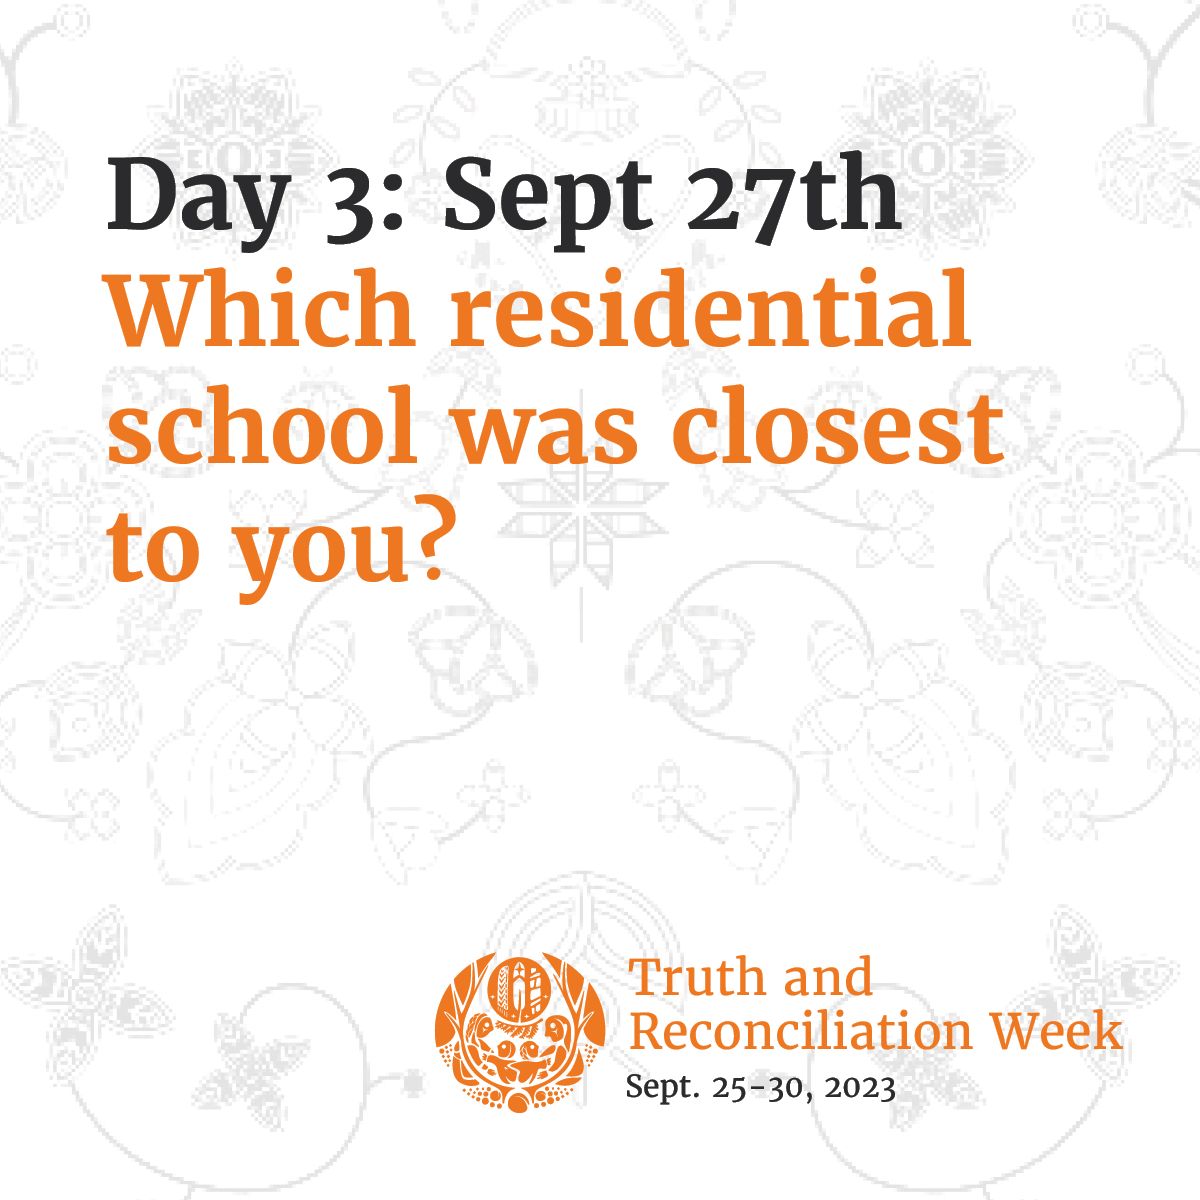 Learn more about #ResidentialSchools with the #NCTR Interactive Map: buff.ly/3u84mJi . Share the closest school to you in the comments. When did it operate? Is it still standing? #reconciliation #reconciliationweek #ResidentialSchoolSurvivors #orangeshirtday @RBC